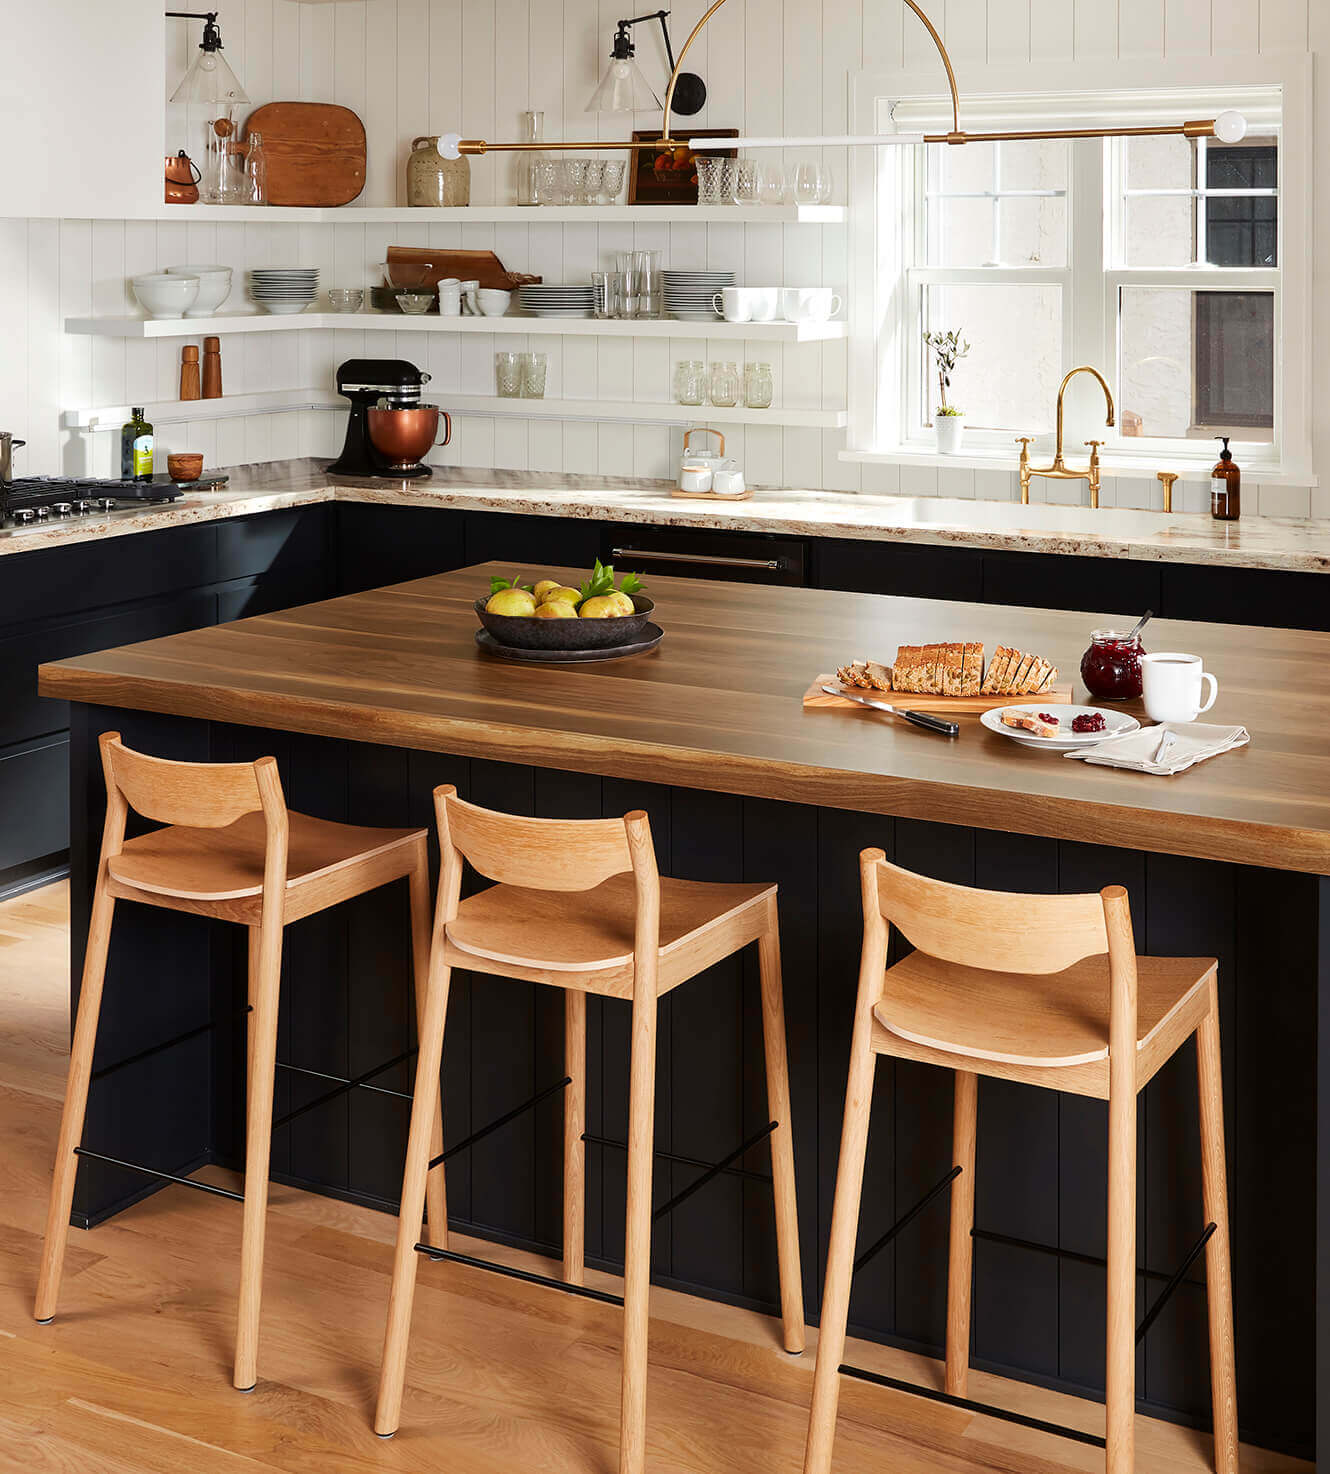 Laholm Black Cabinets in a bold kitchen scene